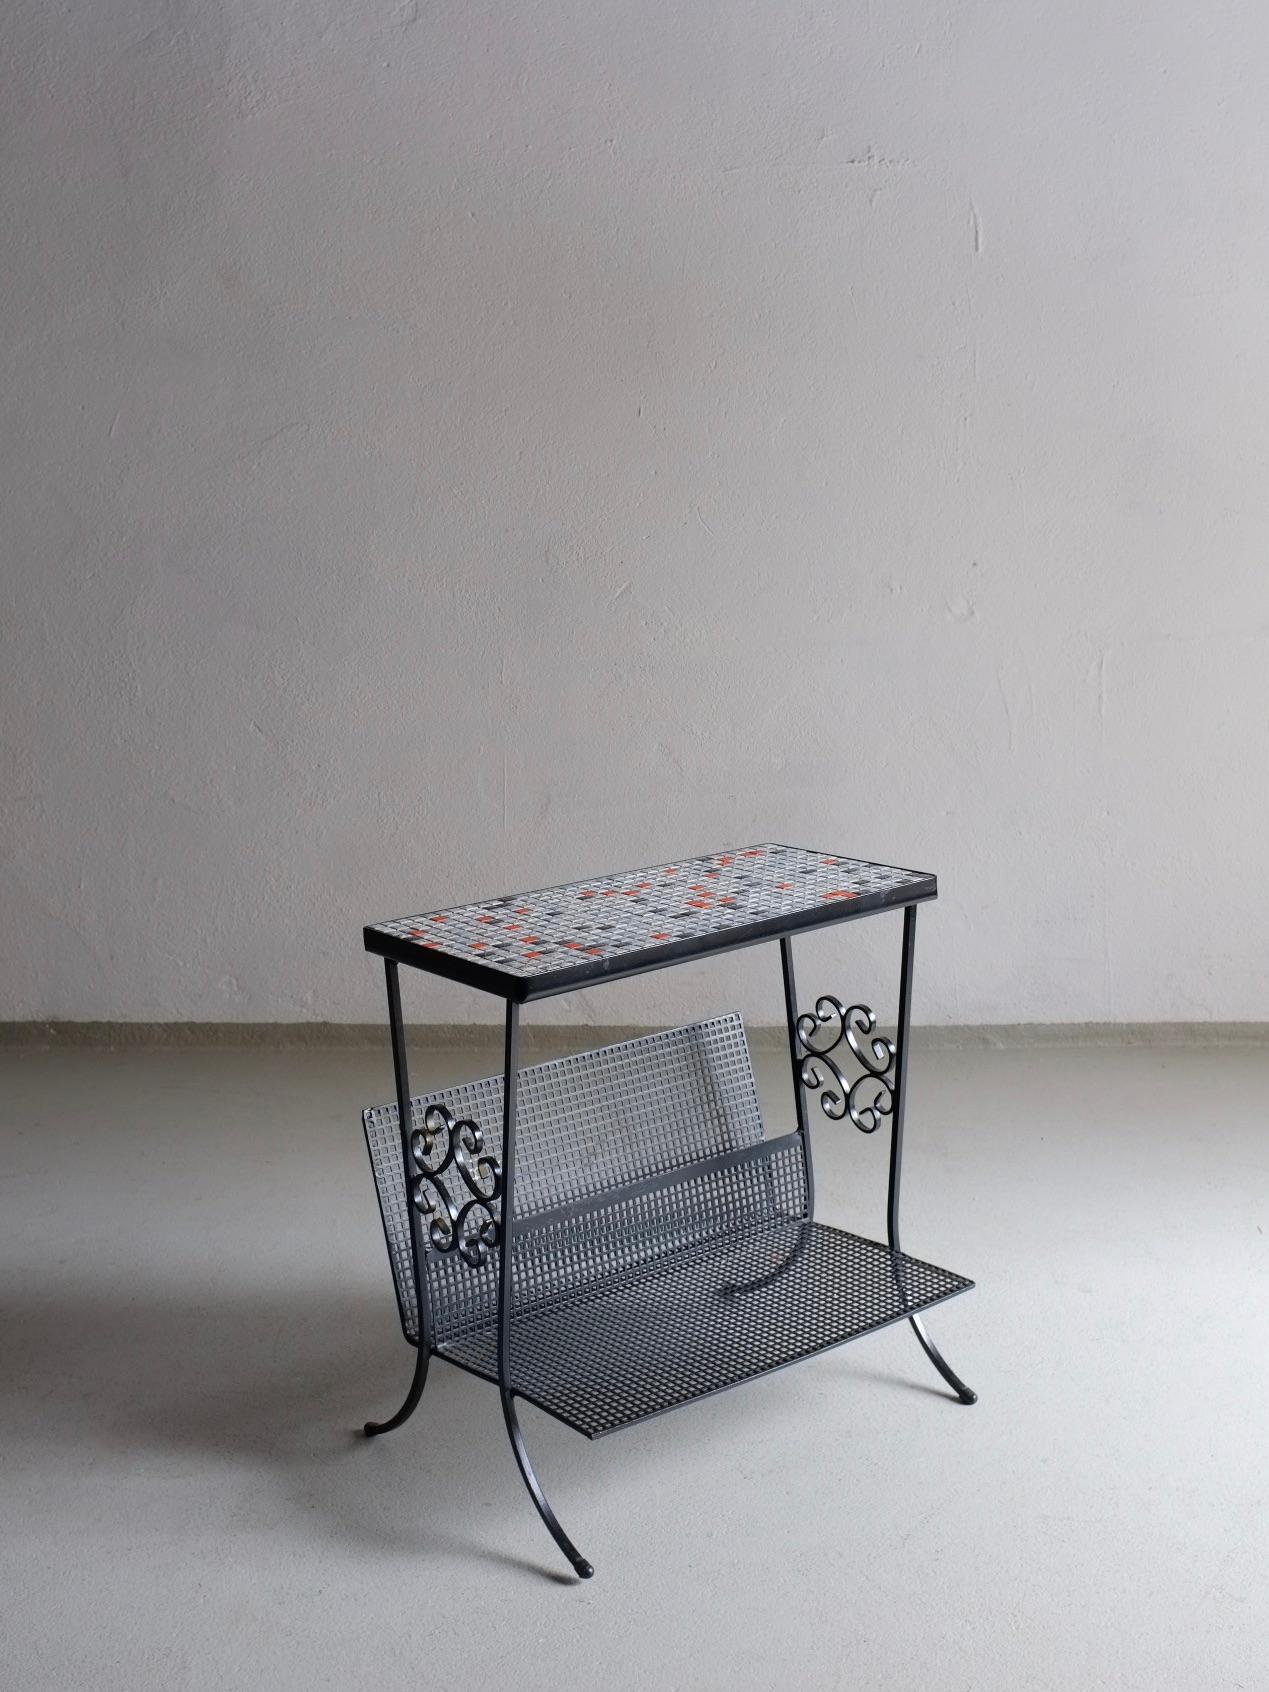 Vintage metal magazine holder with mosaic ceramic tiles tabletop.

Additional information:
Country of manufacture: France
Design period: 1950s
Dimensions: 42 W x 30 D x 42 H cm
Condition: Good vintage condition (some signs of use on metal)